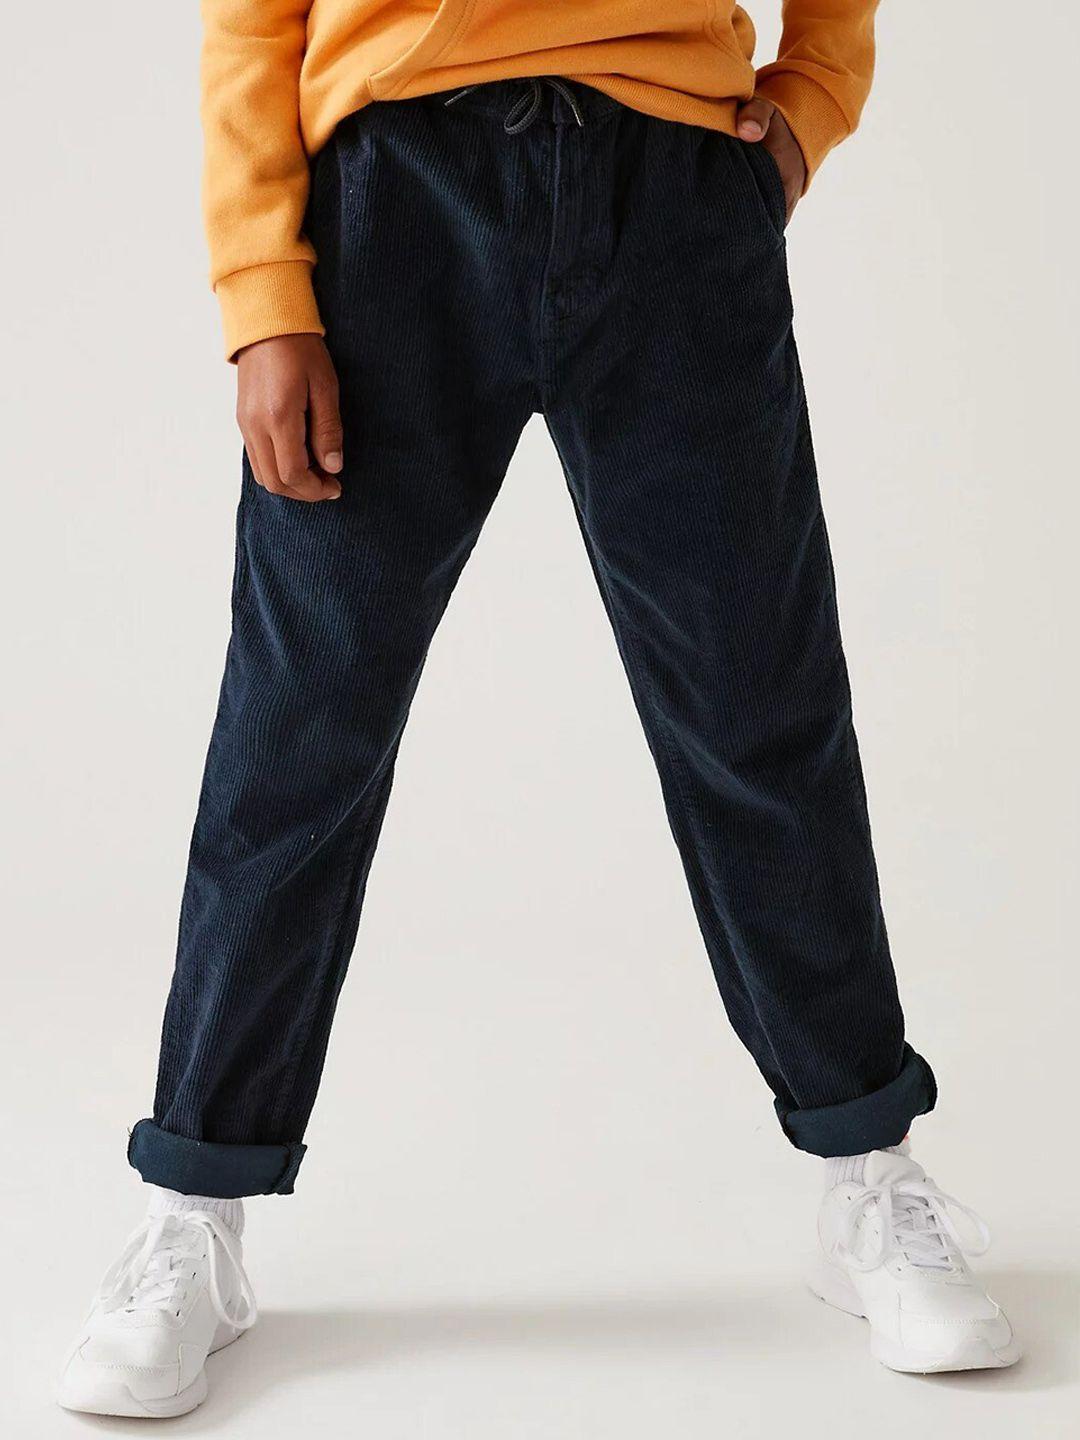 marks & spencer boys navy blue high-rise chinos trousers